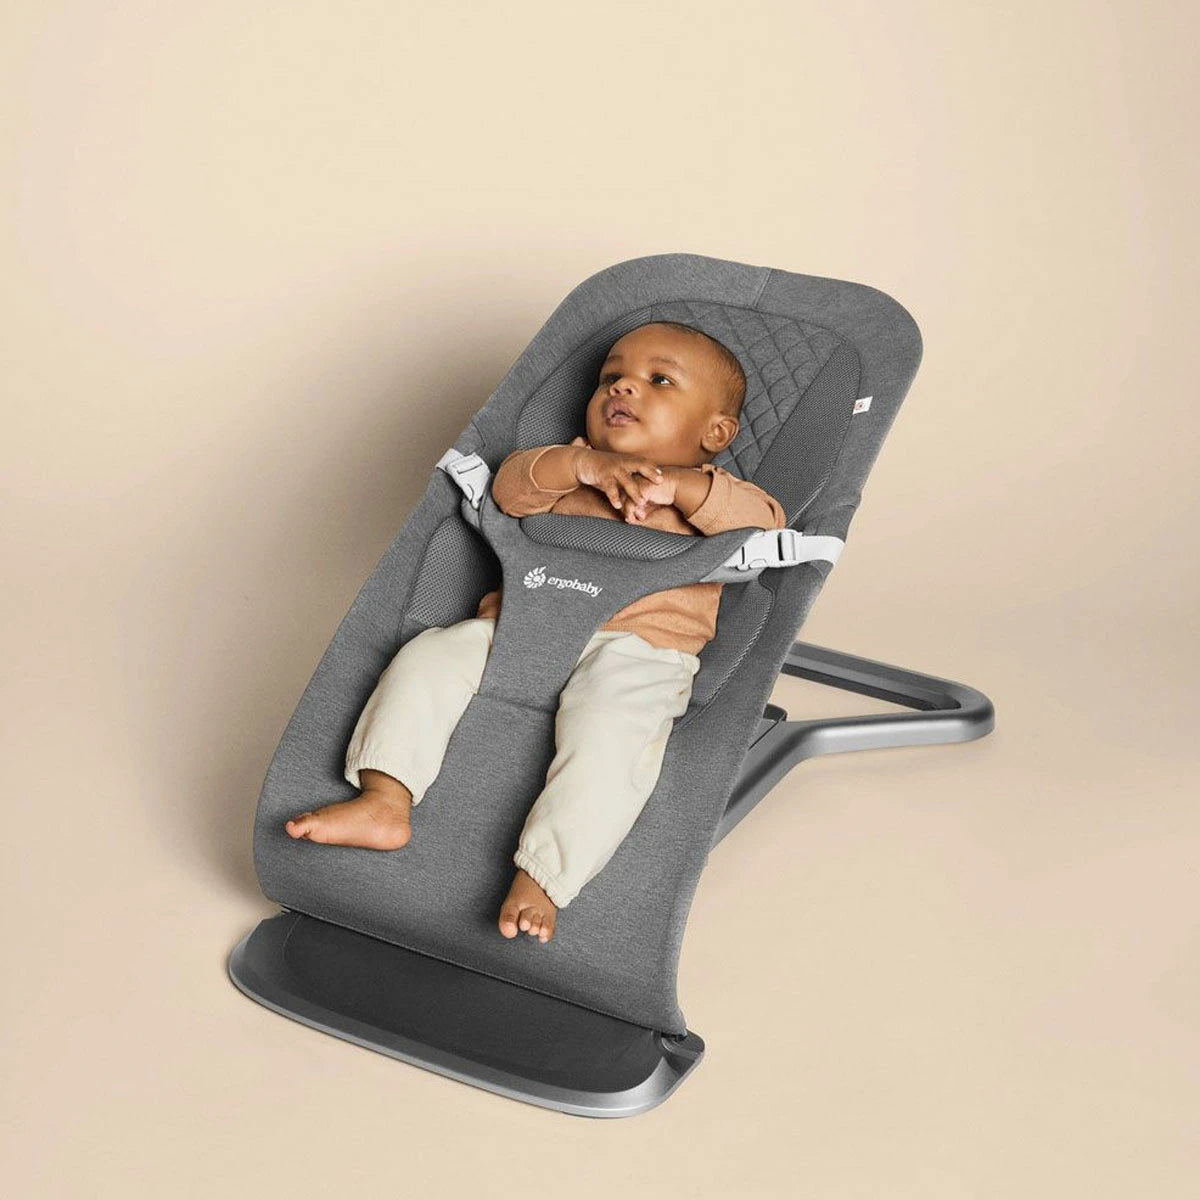 Ergobaby 3-in-1 Evolve Bouncer - Charcoal Grey Lifestyle 2